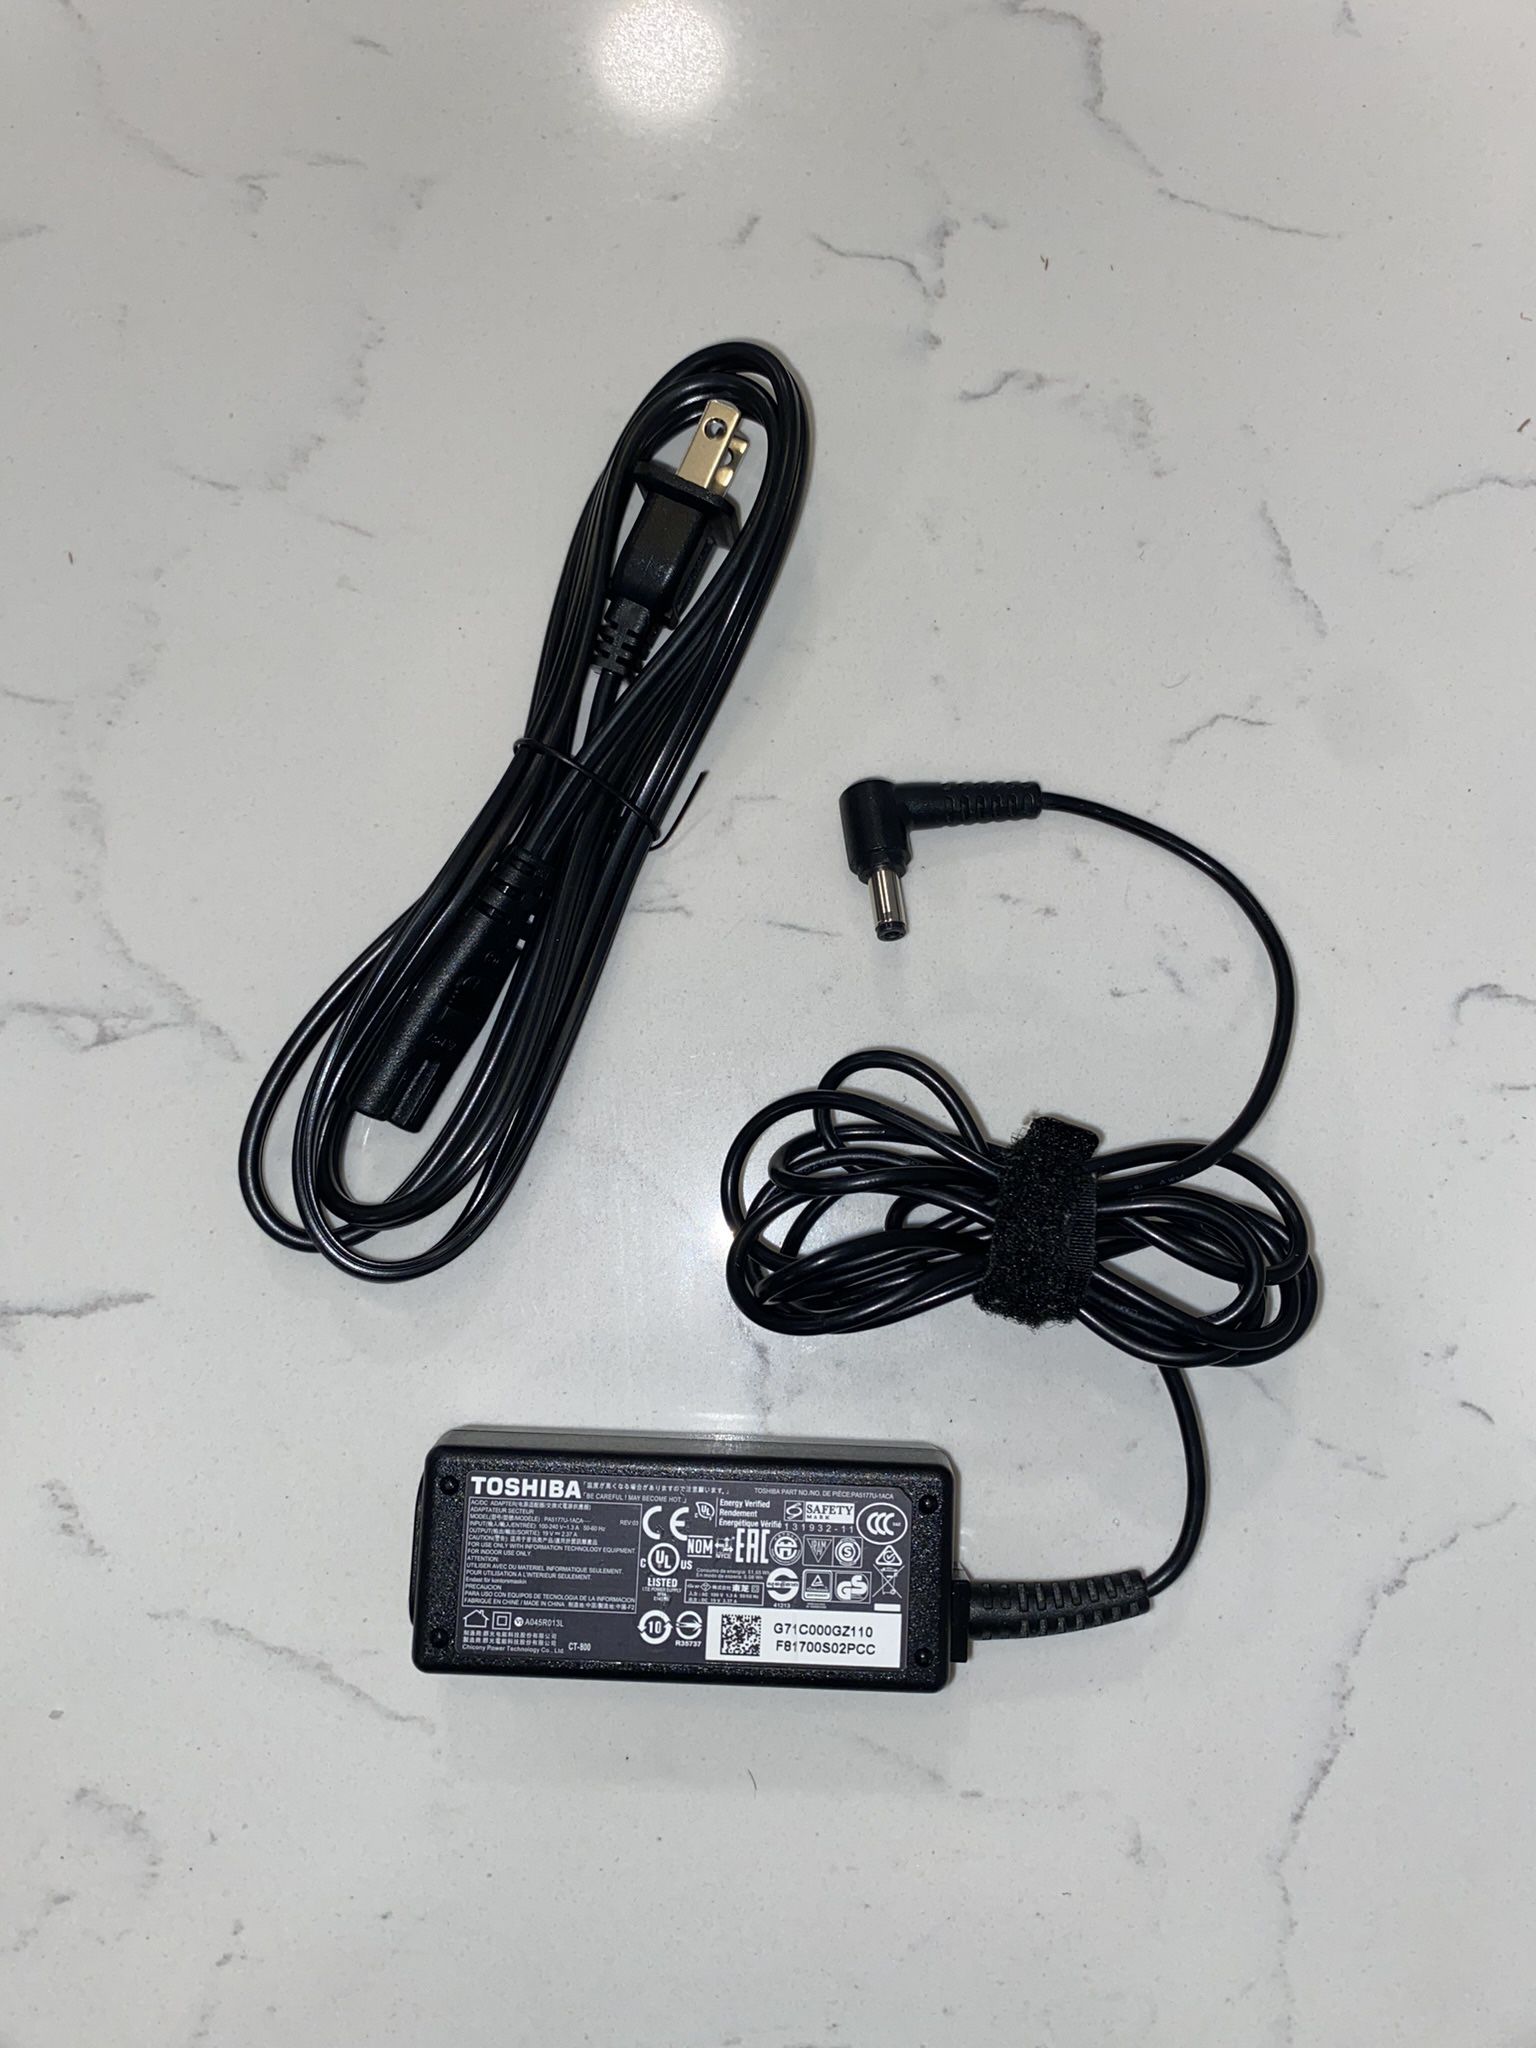 Toshiba Laptop Charger (NEW!)